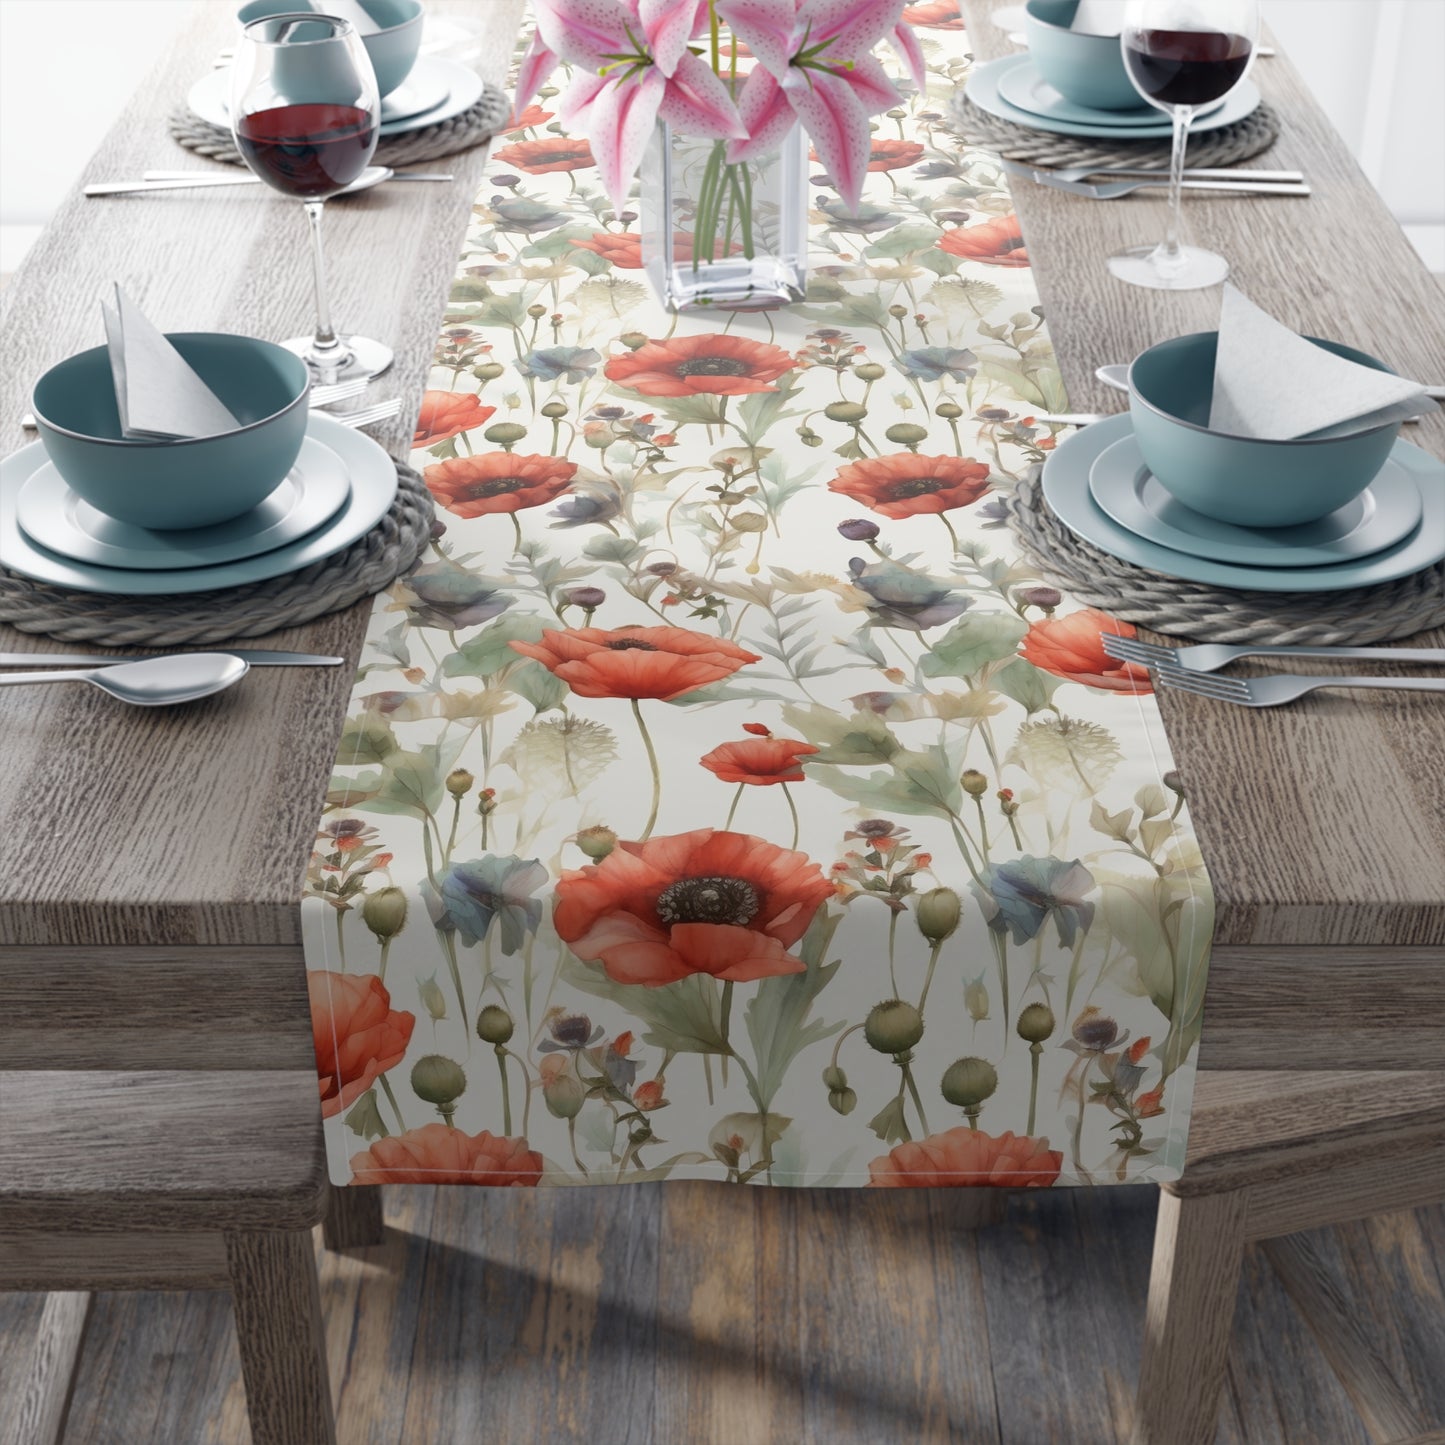 red poppy table runner with green leaves and flowers for veterans day gifts